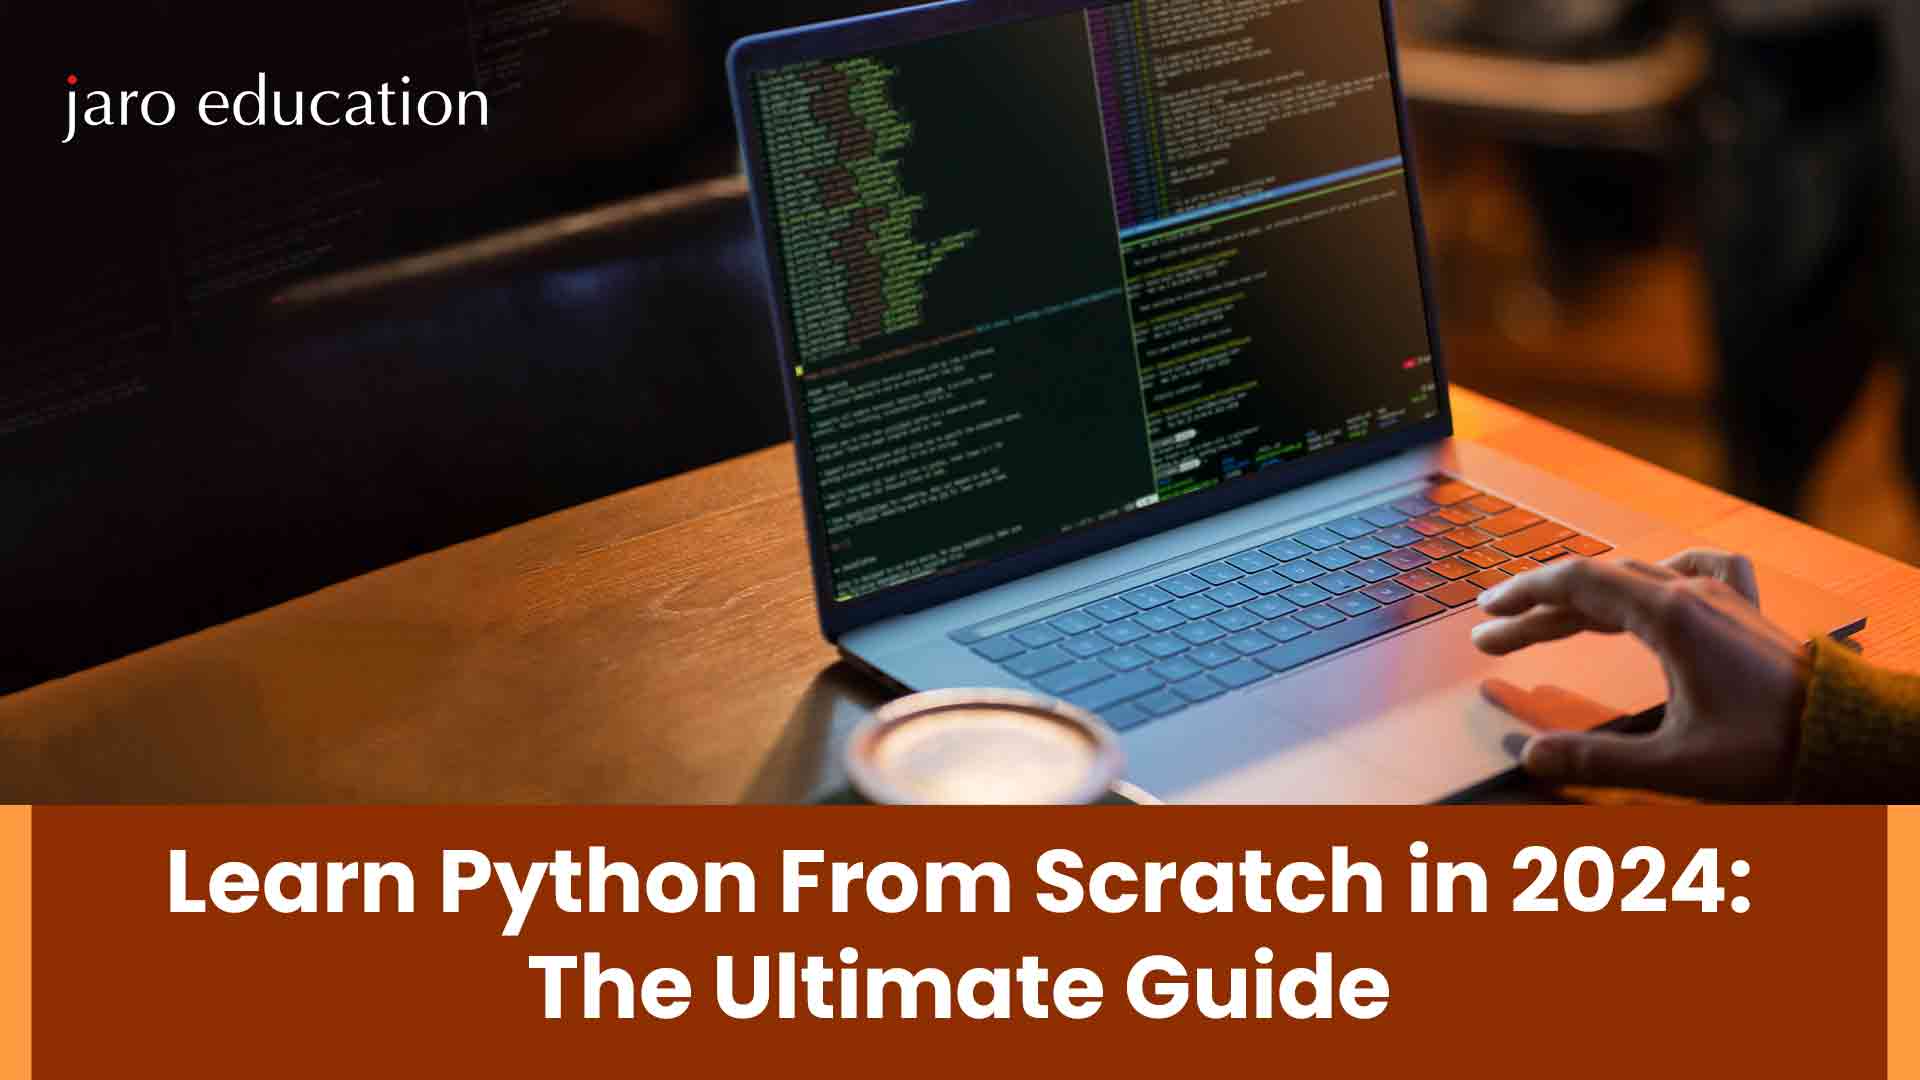 Learn-Python-From-Scratch-in-2024-The-Ultimate-Guide